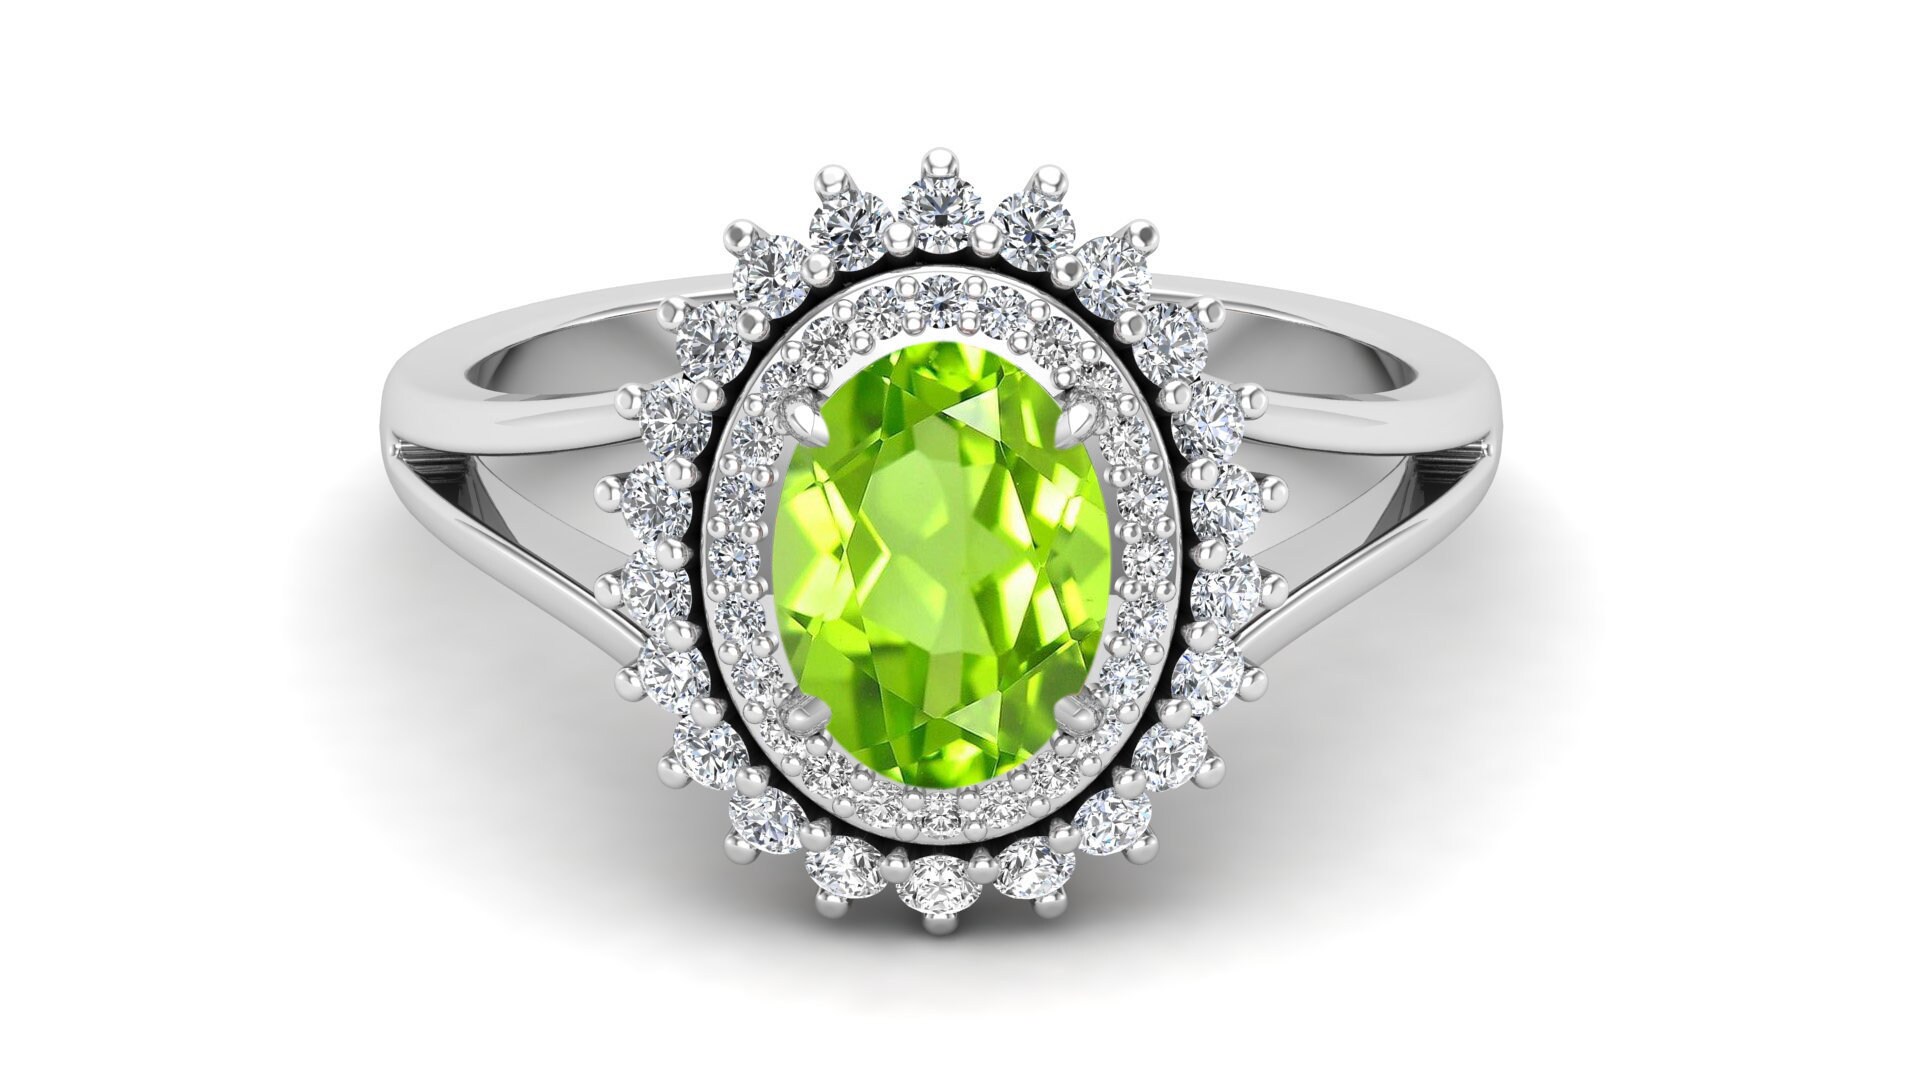 Green Stone Ring Cathedral Shank Ring Peridot Engagement Bridal Ring Solitaire Ring Vintage Art Deco Ring 1.35 ct Flower Ring.